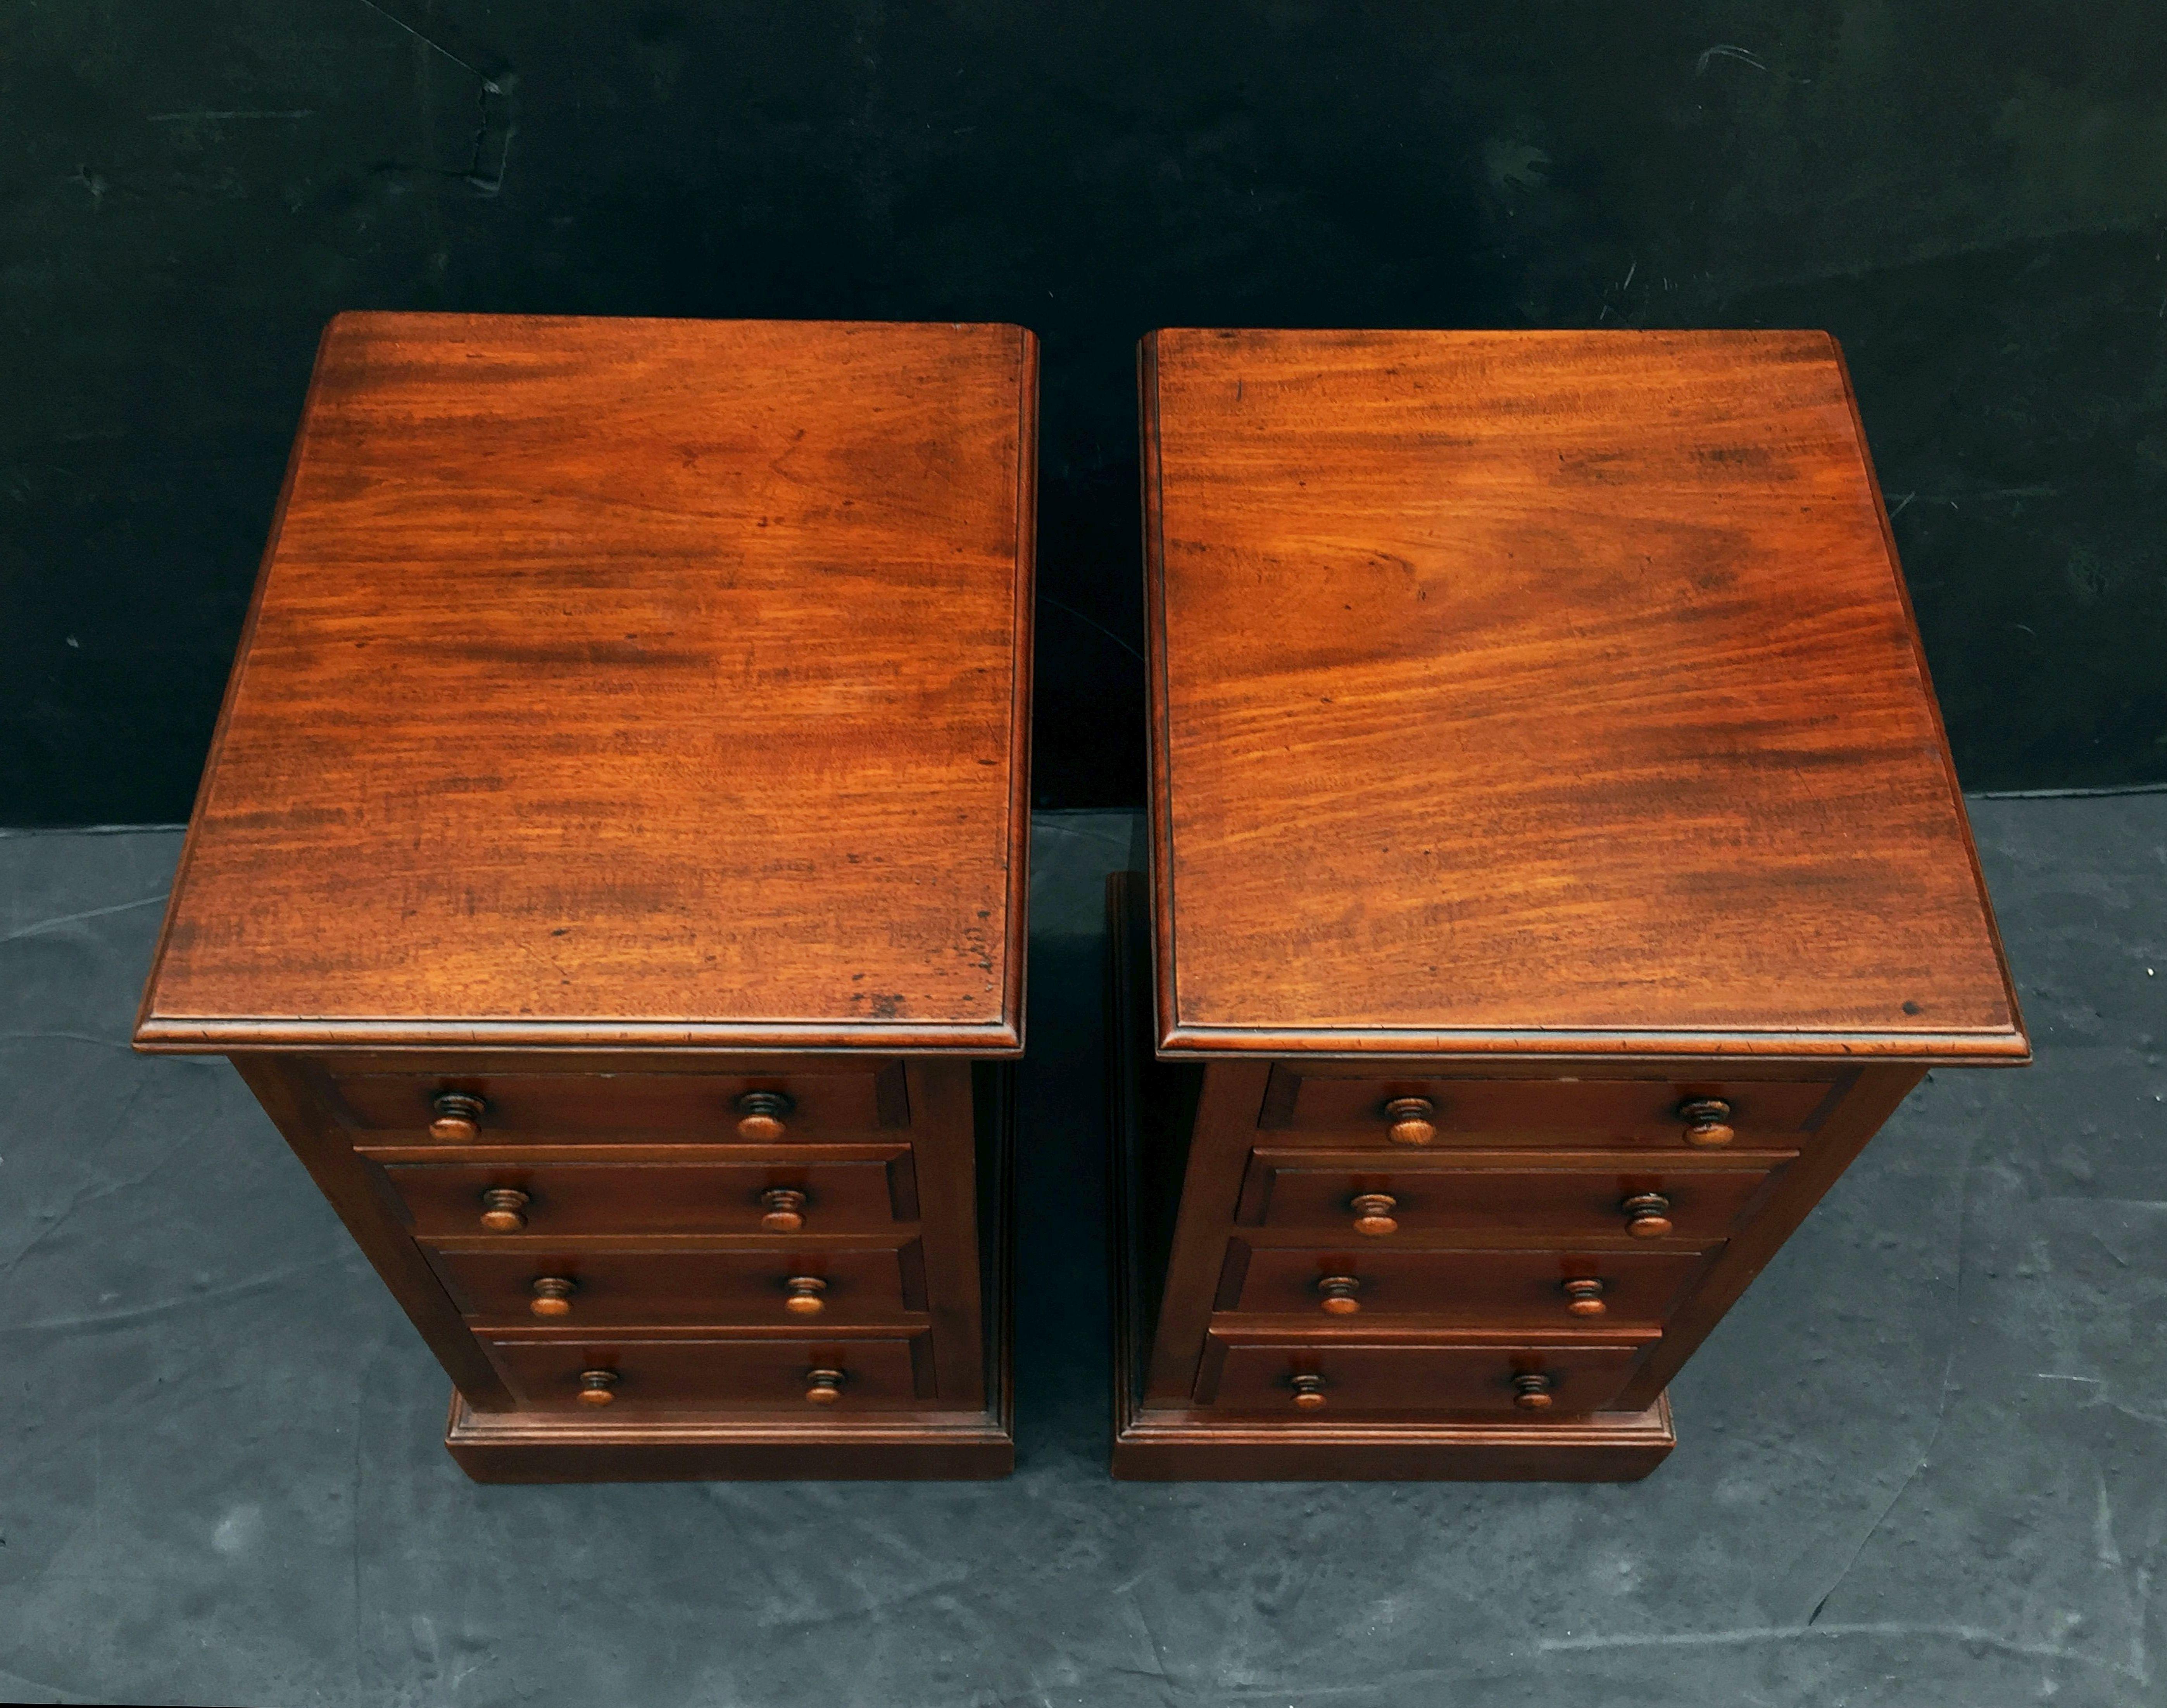 English Bedside Chests or Cabinet Nightstands of Mahogany - 'Priced as a Pair' 2